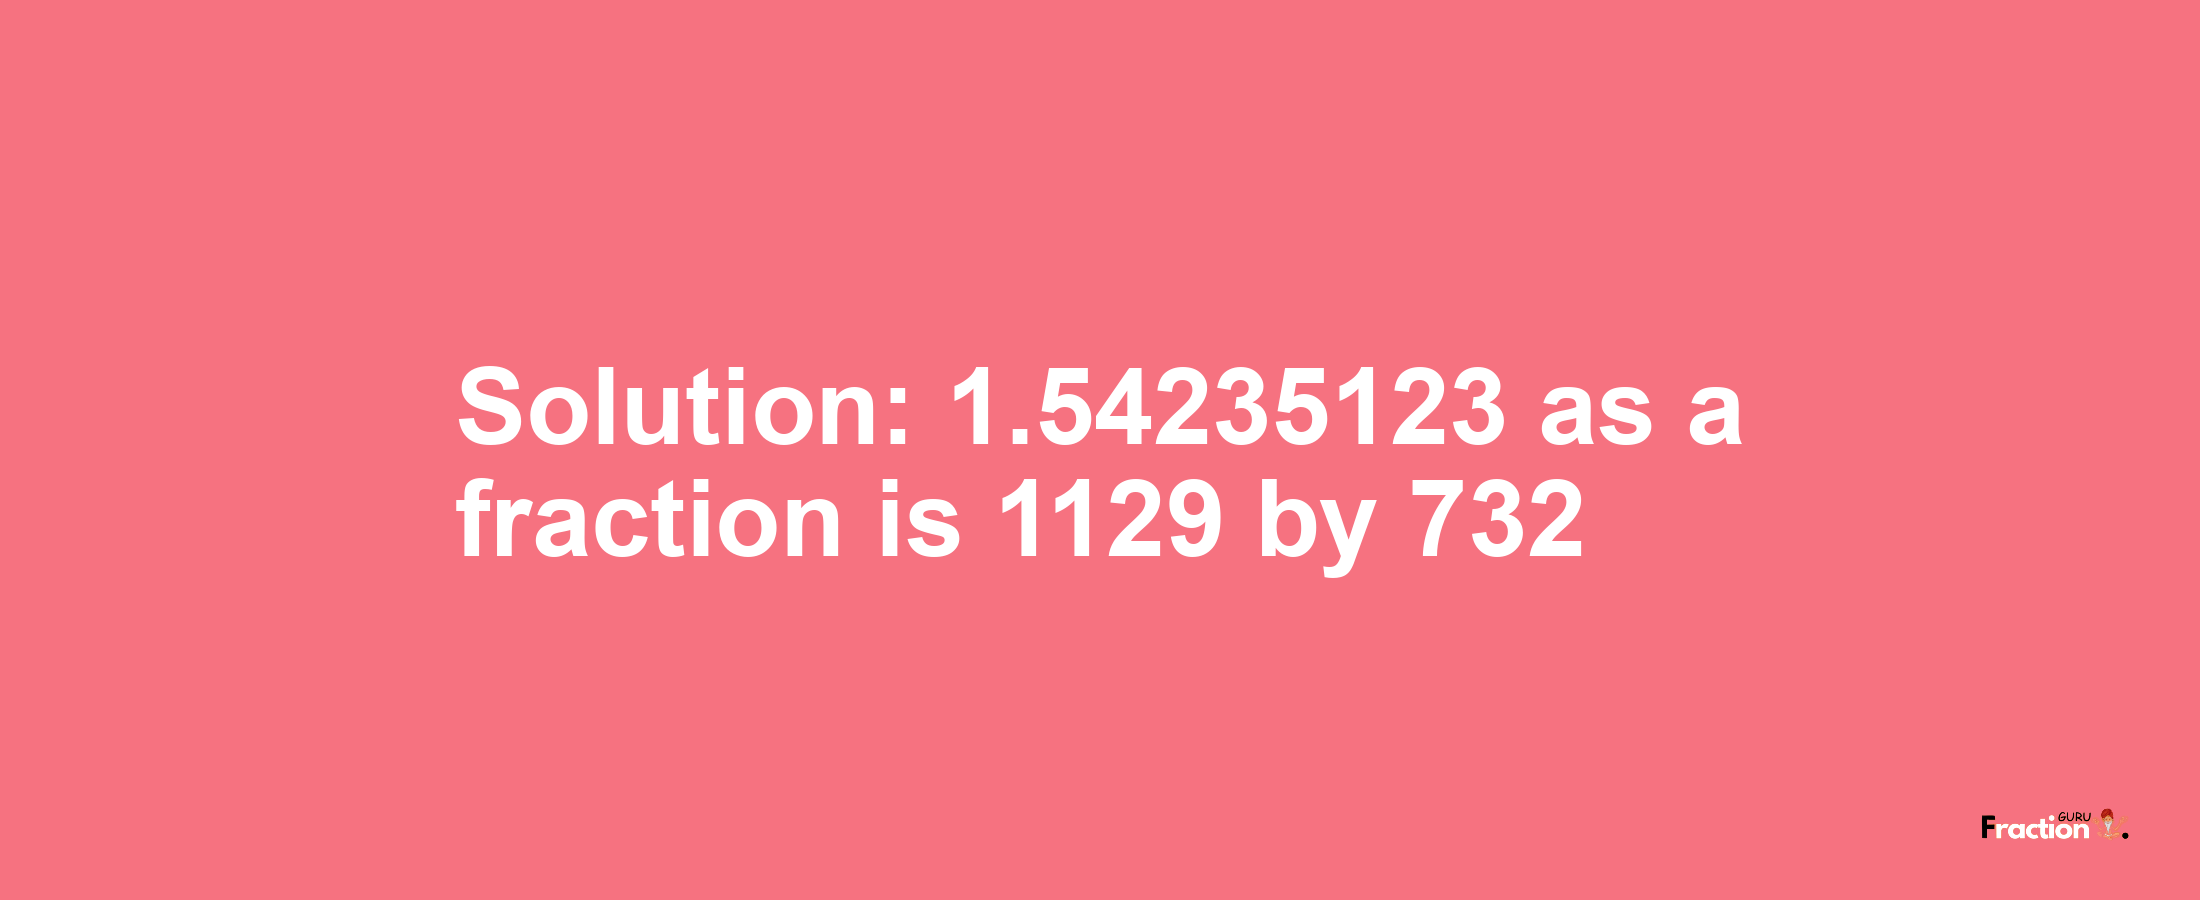 Solution:1.54235123 as a fraction is 1129/732